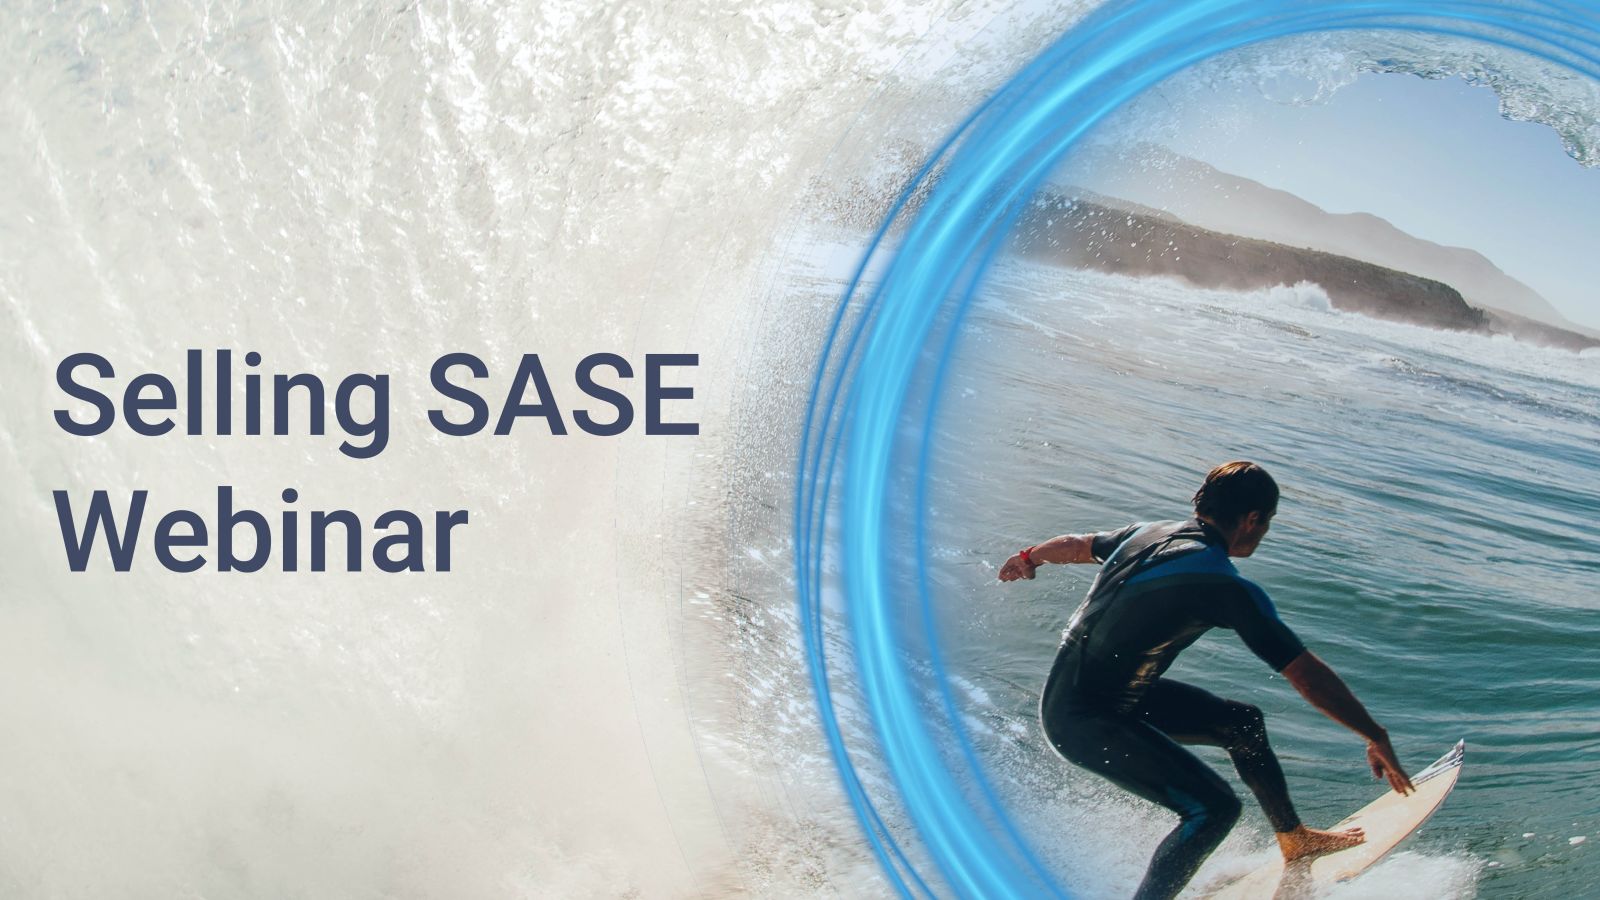 ON DEMAND - Discover Cisco SASE with Ingram Micro - Selling SASE Featured Image